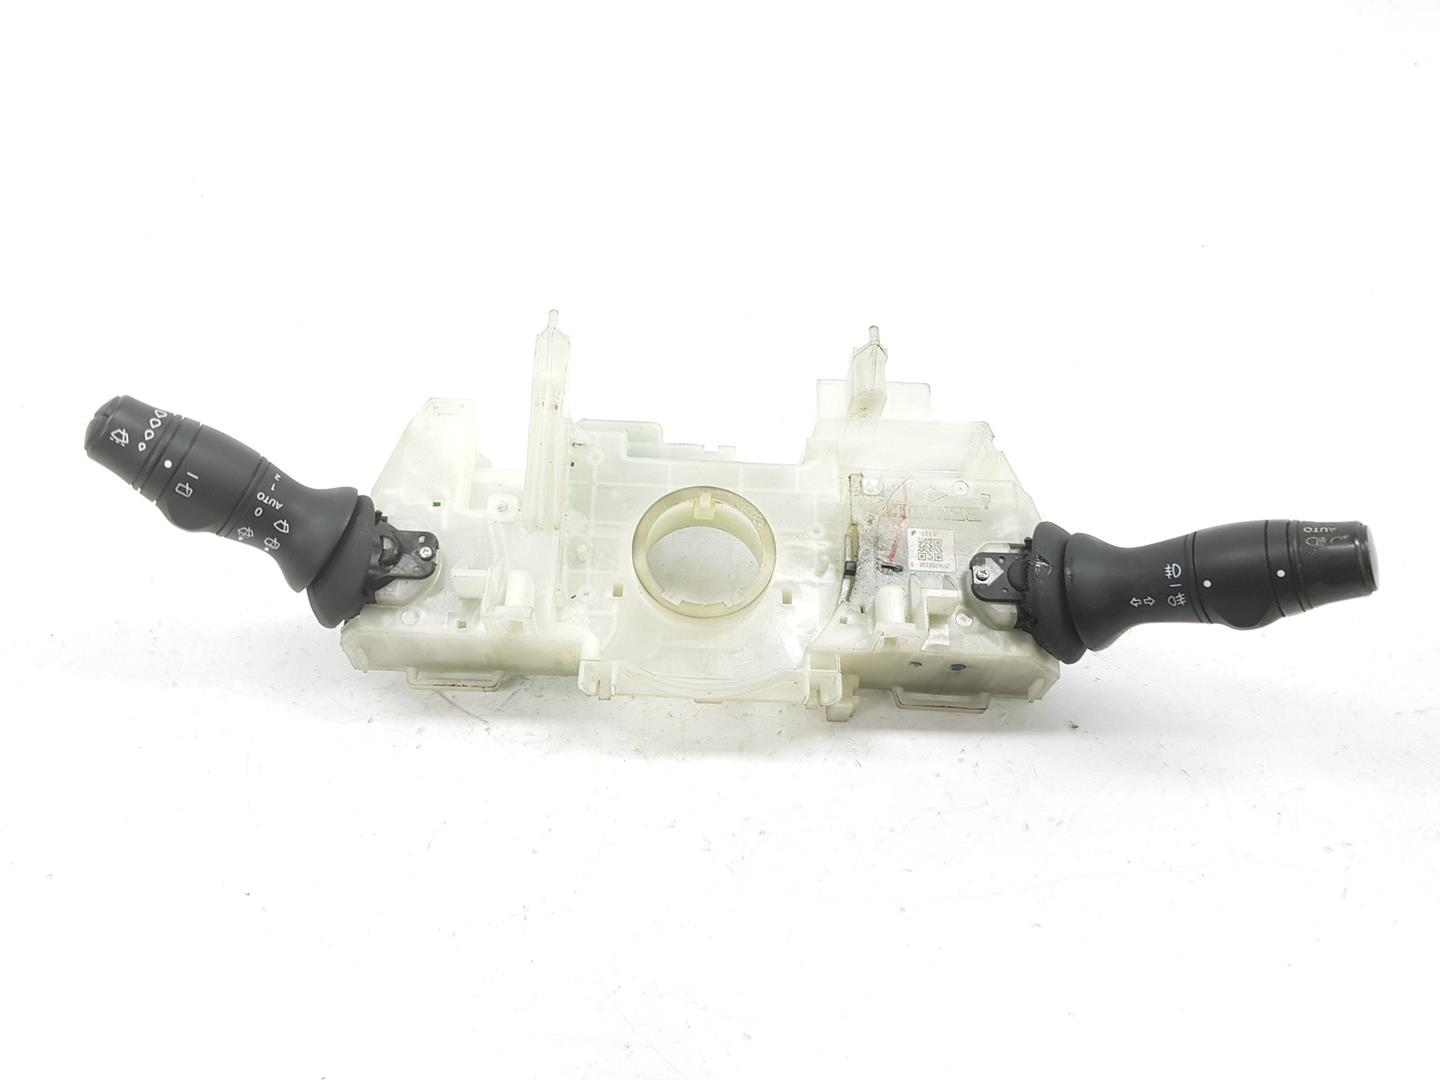 RENAULT Megane 3 generation (2008-2020) Steering wheel buttons / switches 255670019R, 255670019R 19928910